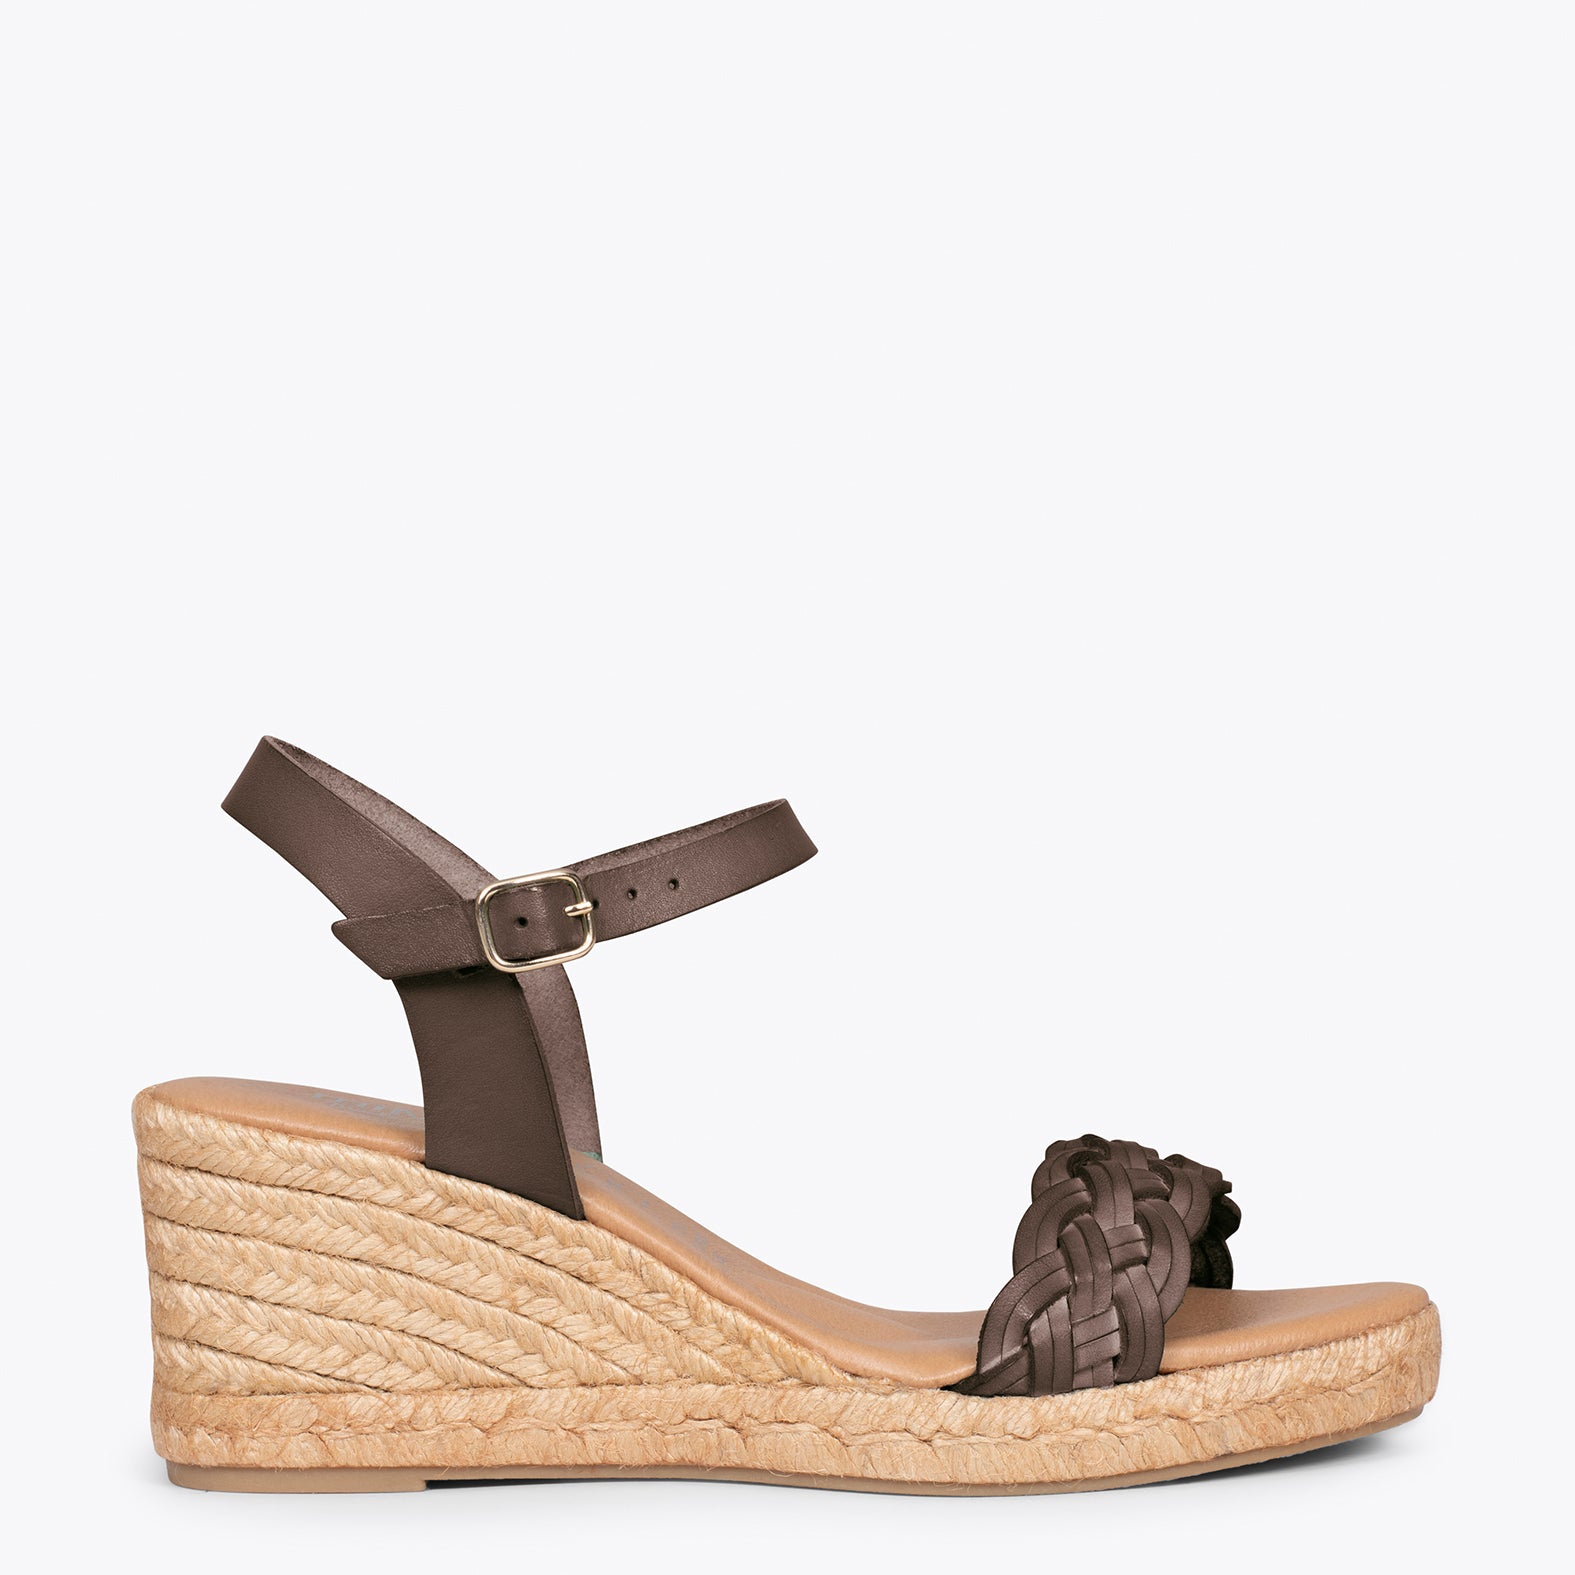 BRAID – TAUPE espadrille with braided strap